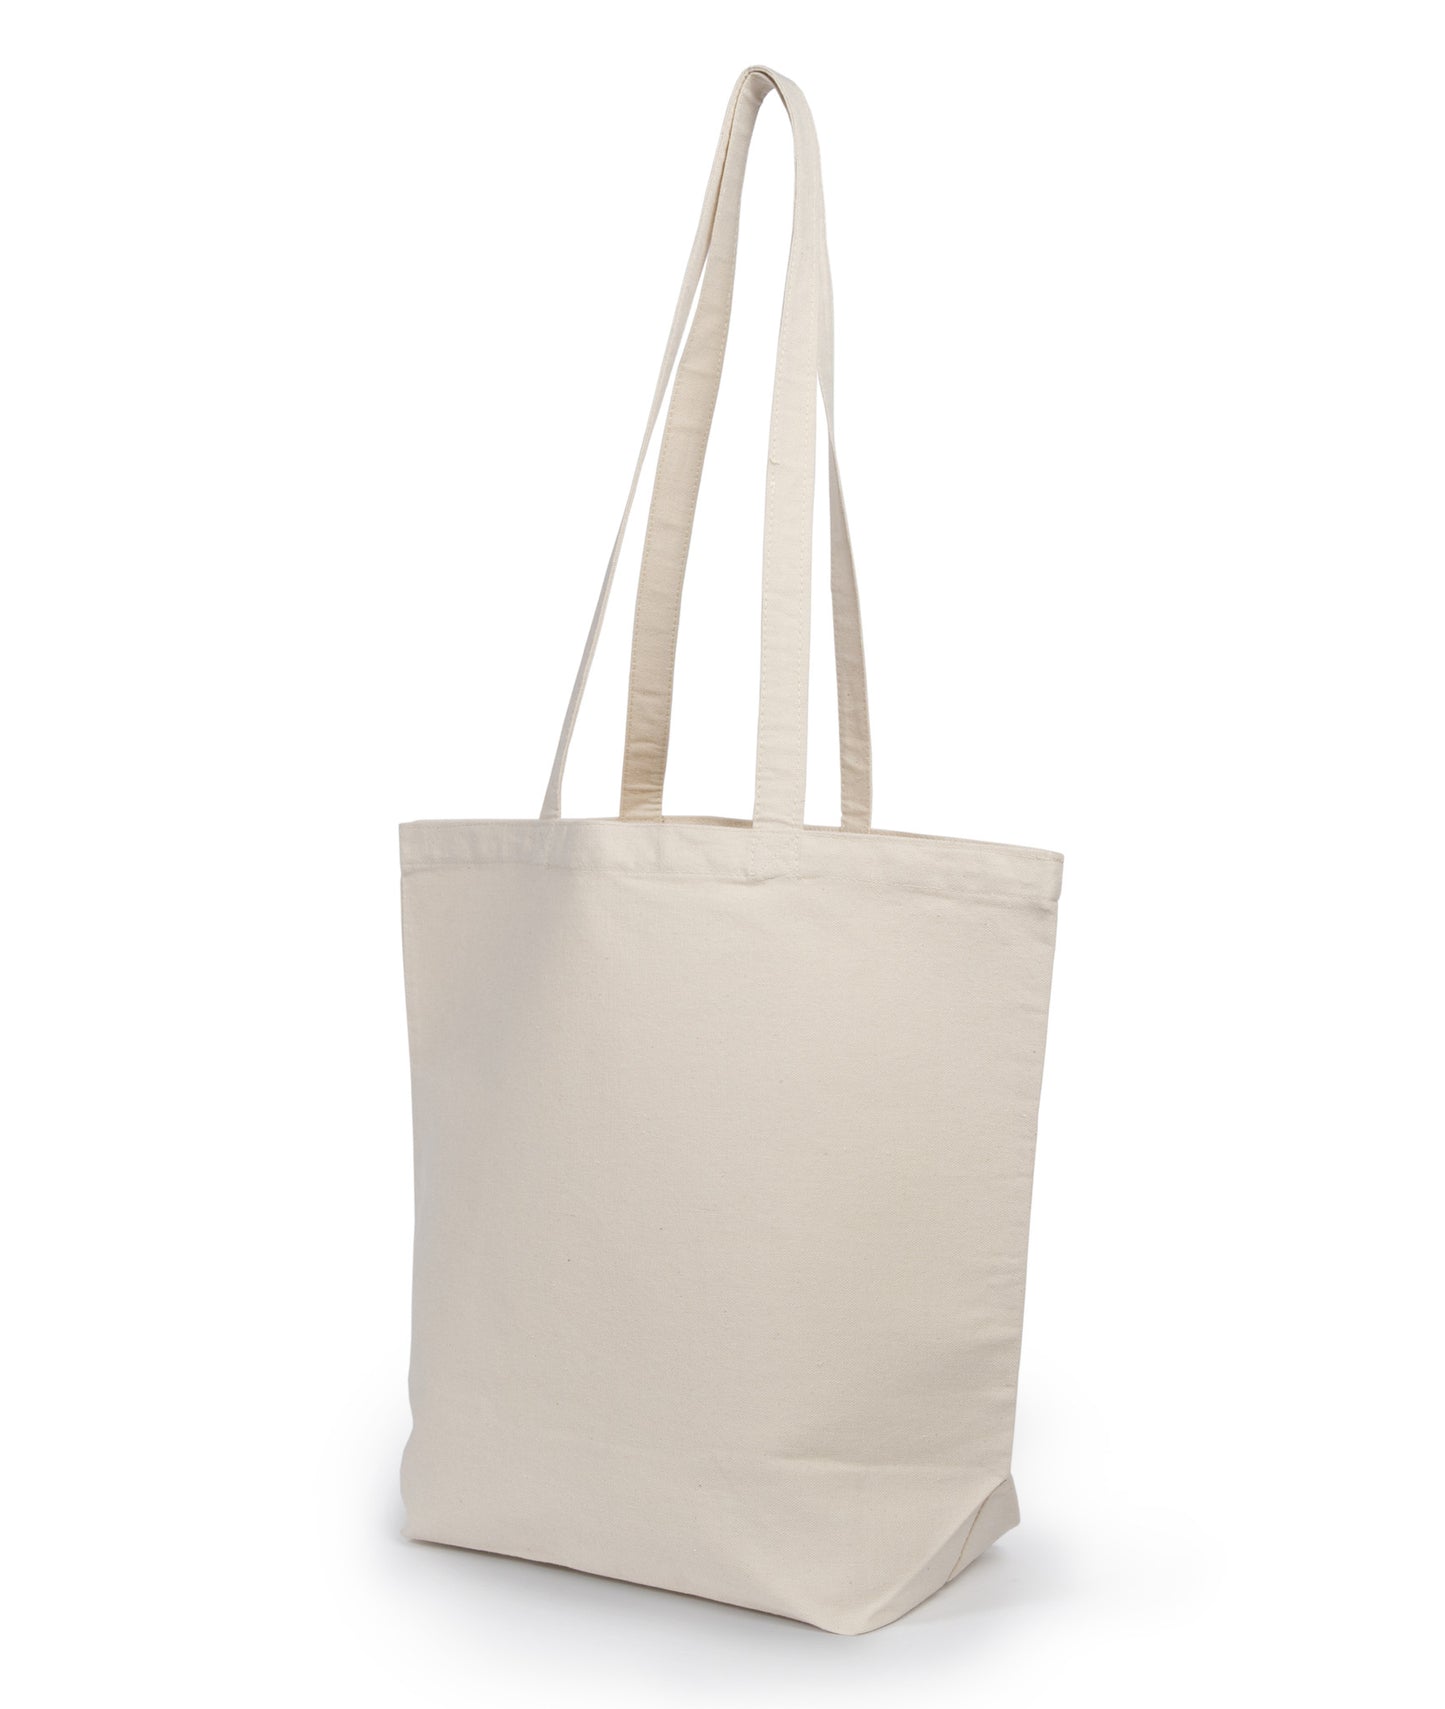 UltraClub Jumbo Tote with Gusset - EZ Corporate Clothing
 - 3